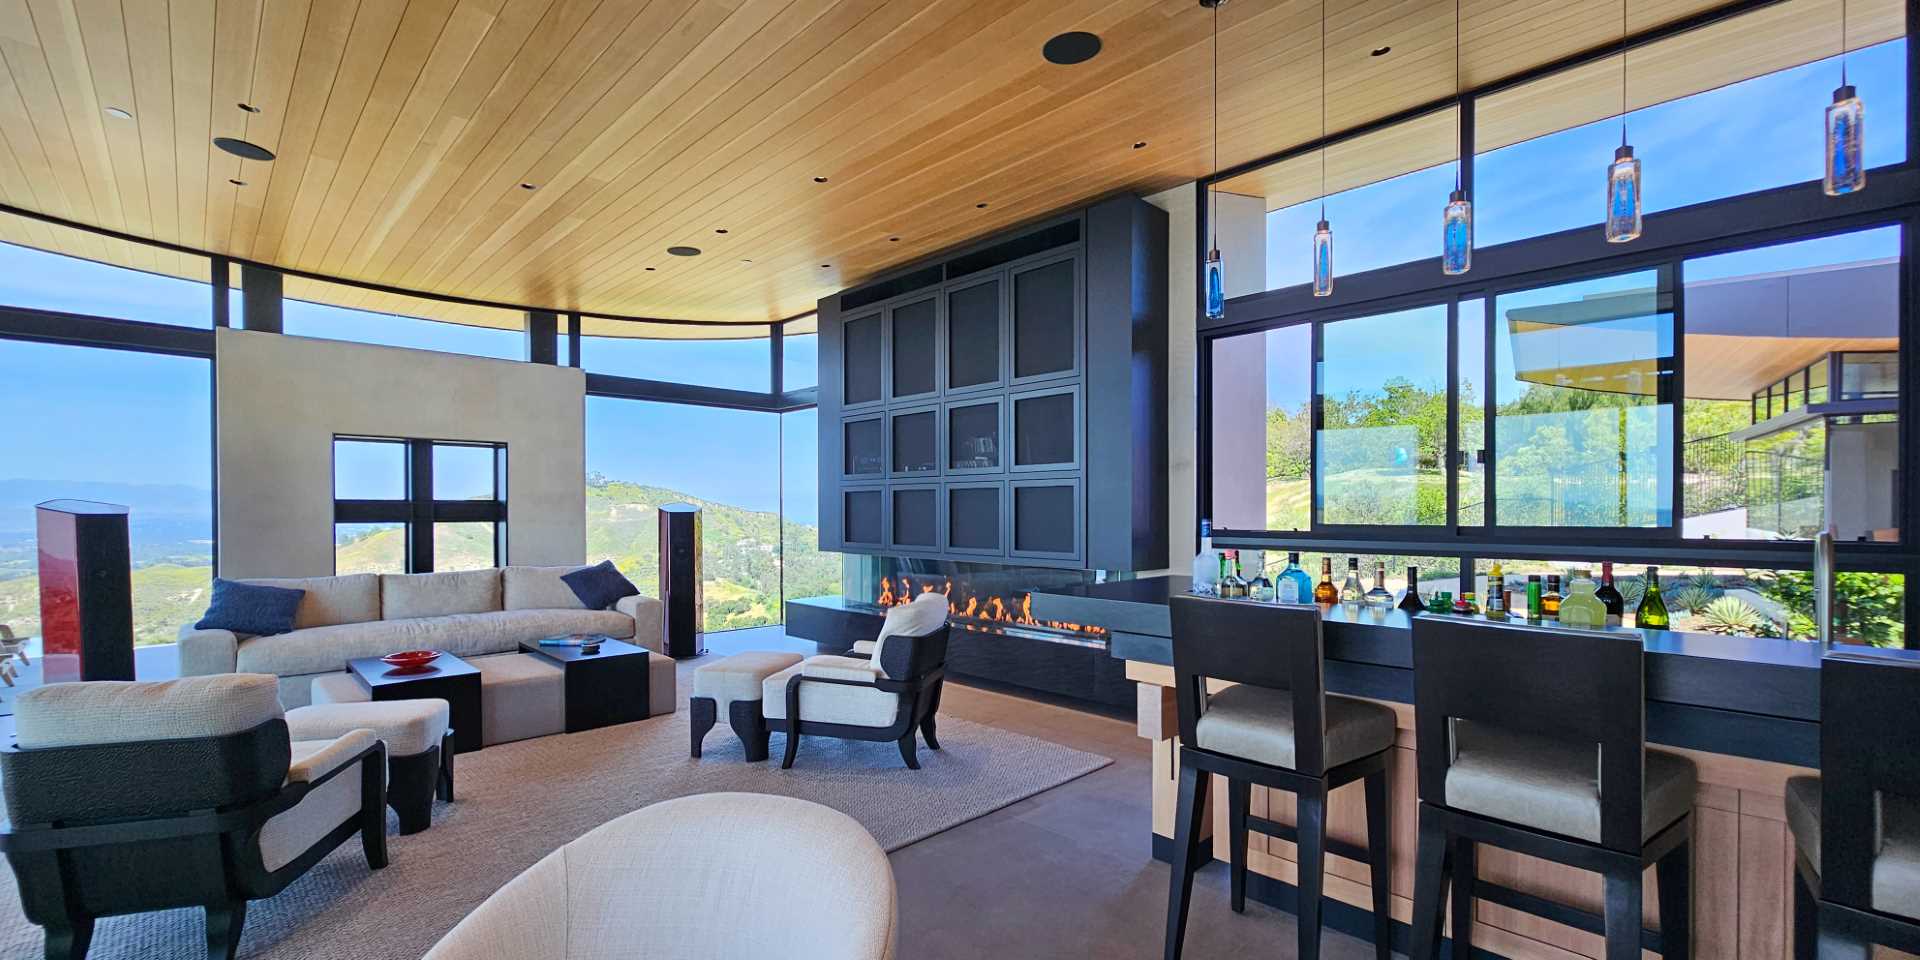 A modern living room with a fireplace and bar.